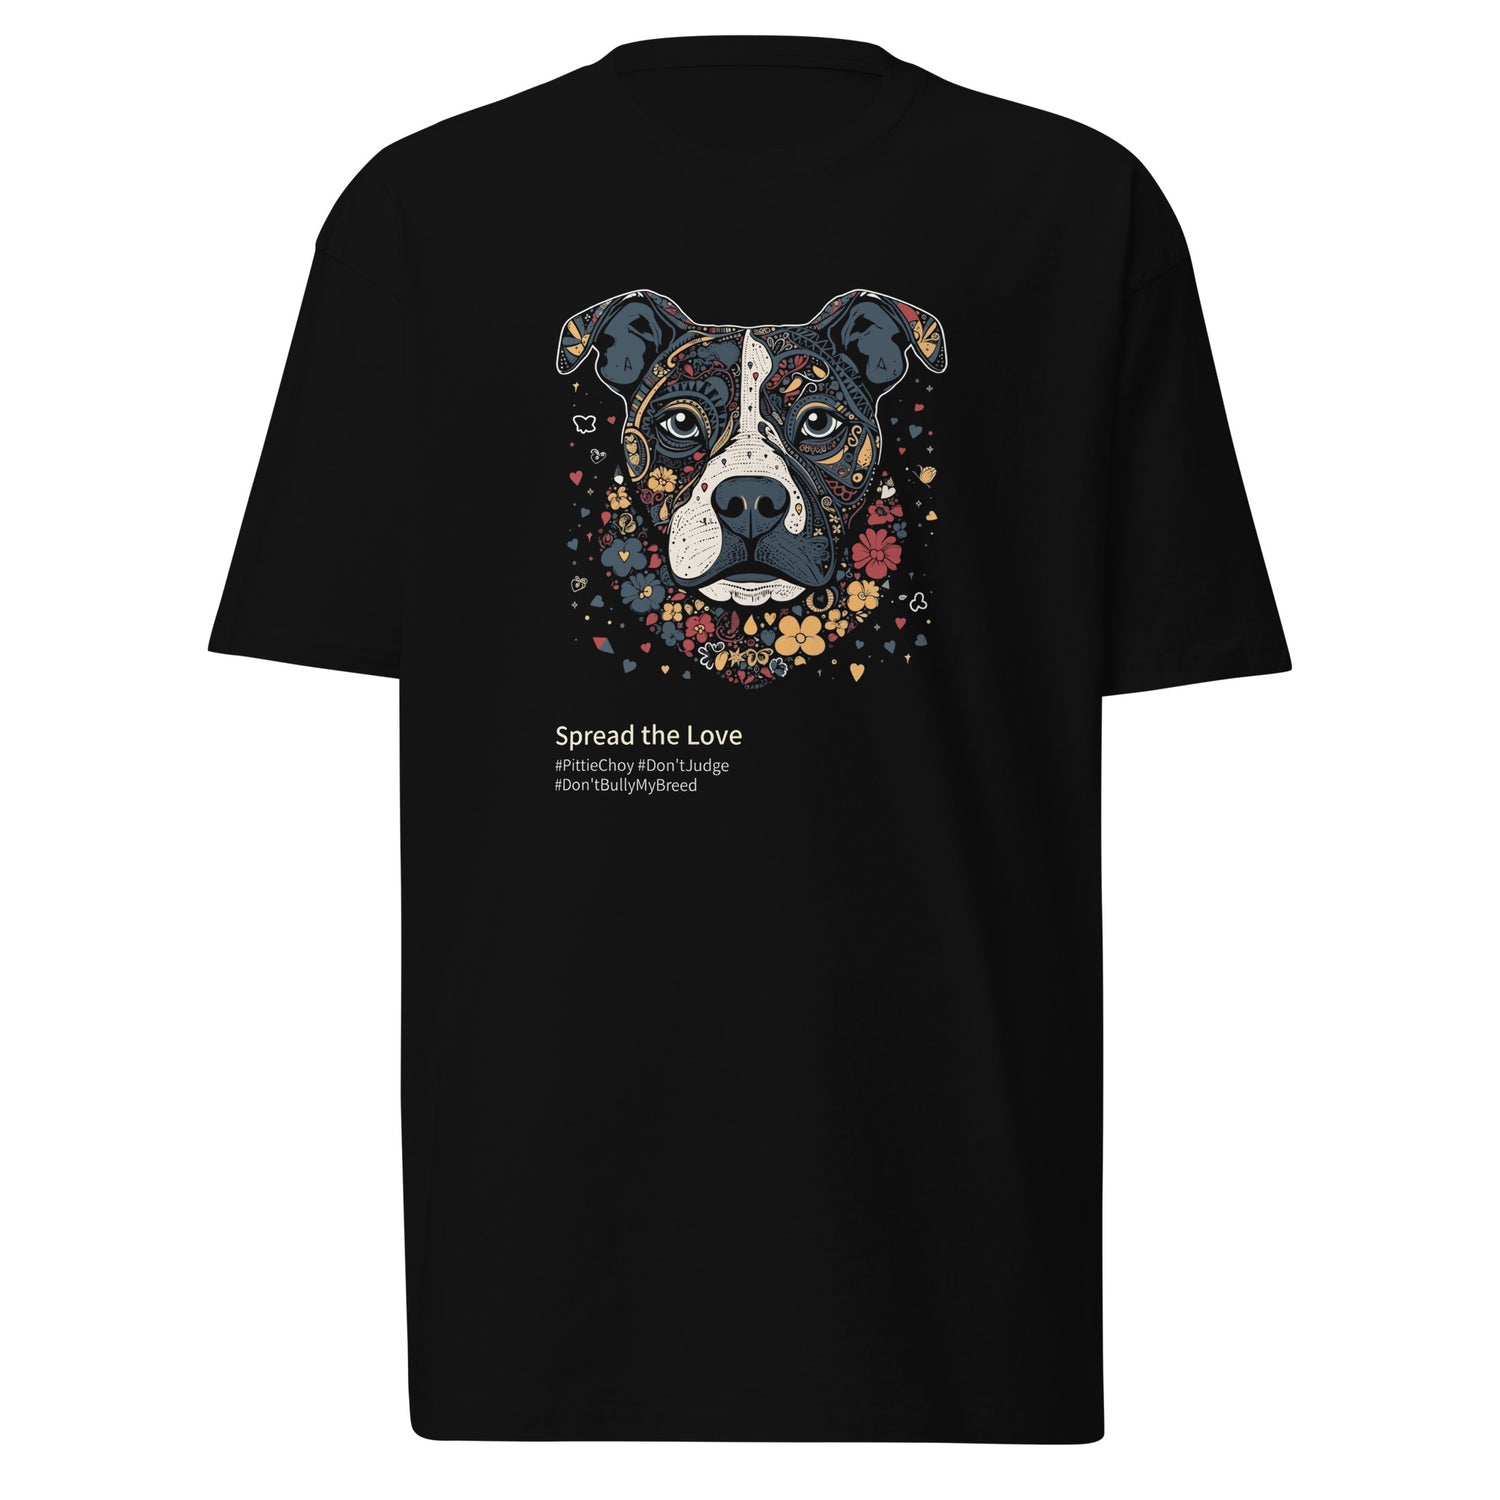 Spread The Love - Men's T-shirt: Stand Up for Pitbulls and Promote Positivity - Pittie Choy